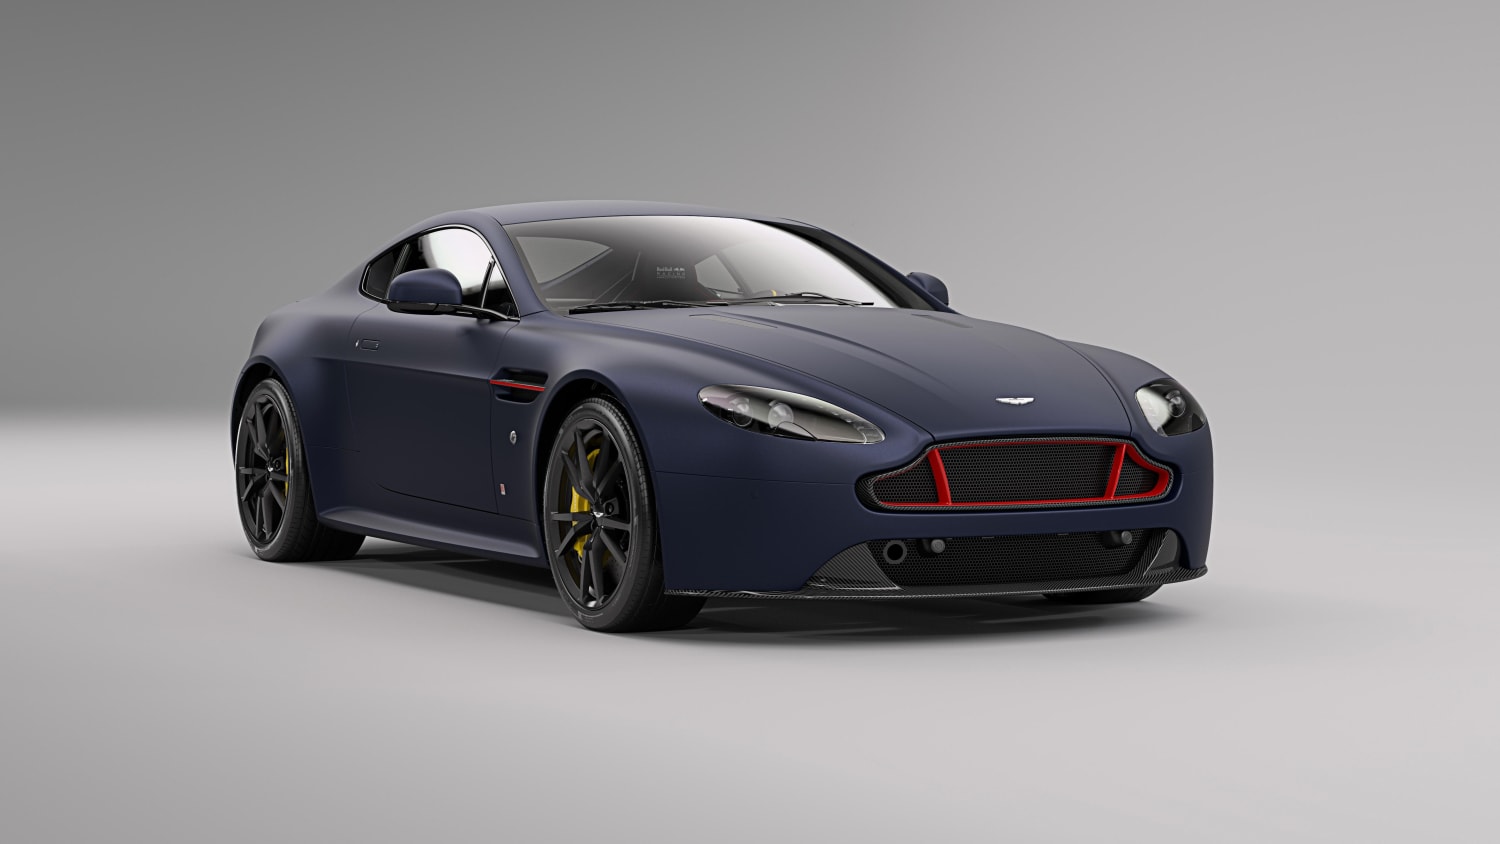 Red Bull Racing and Aston Martin special editions